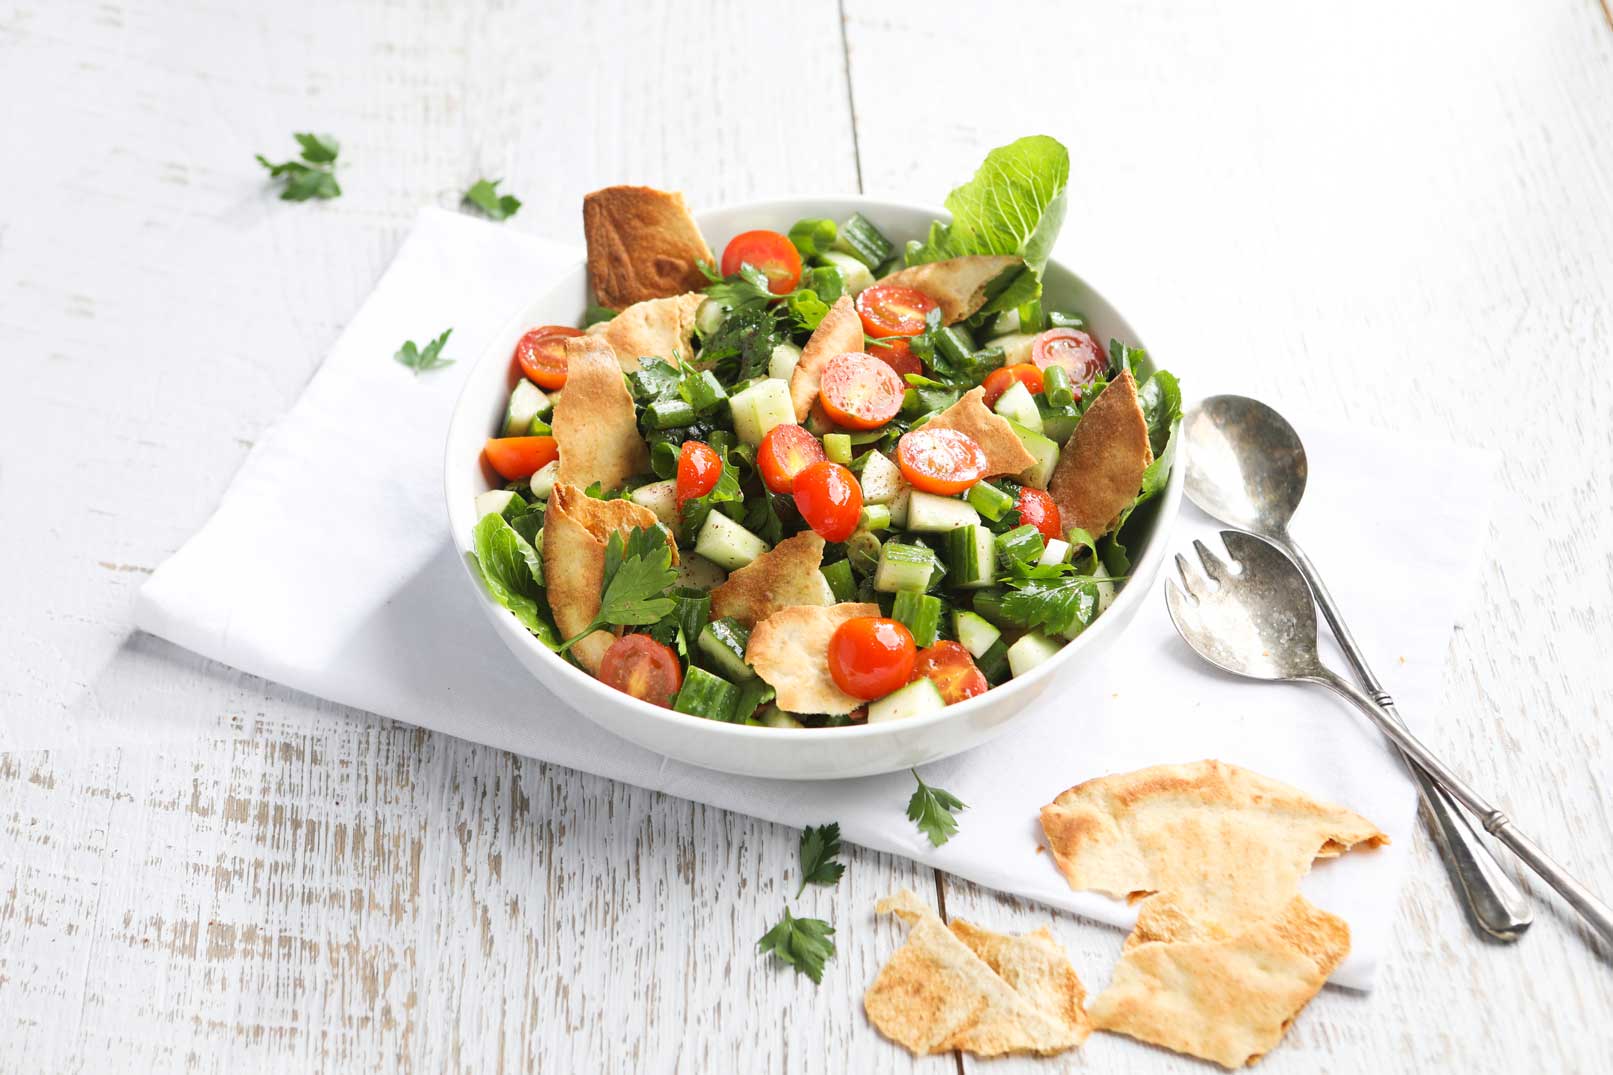 Image of fattoush salad topped with coriander in a white bowl on a white cloth napkin with serving spoons on the side.